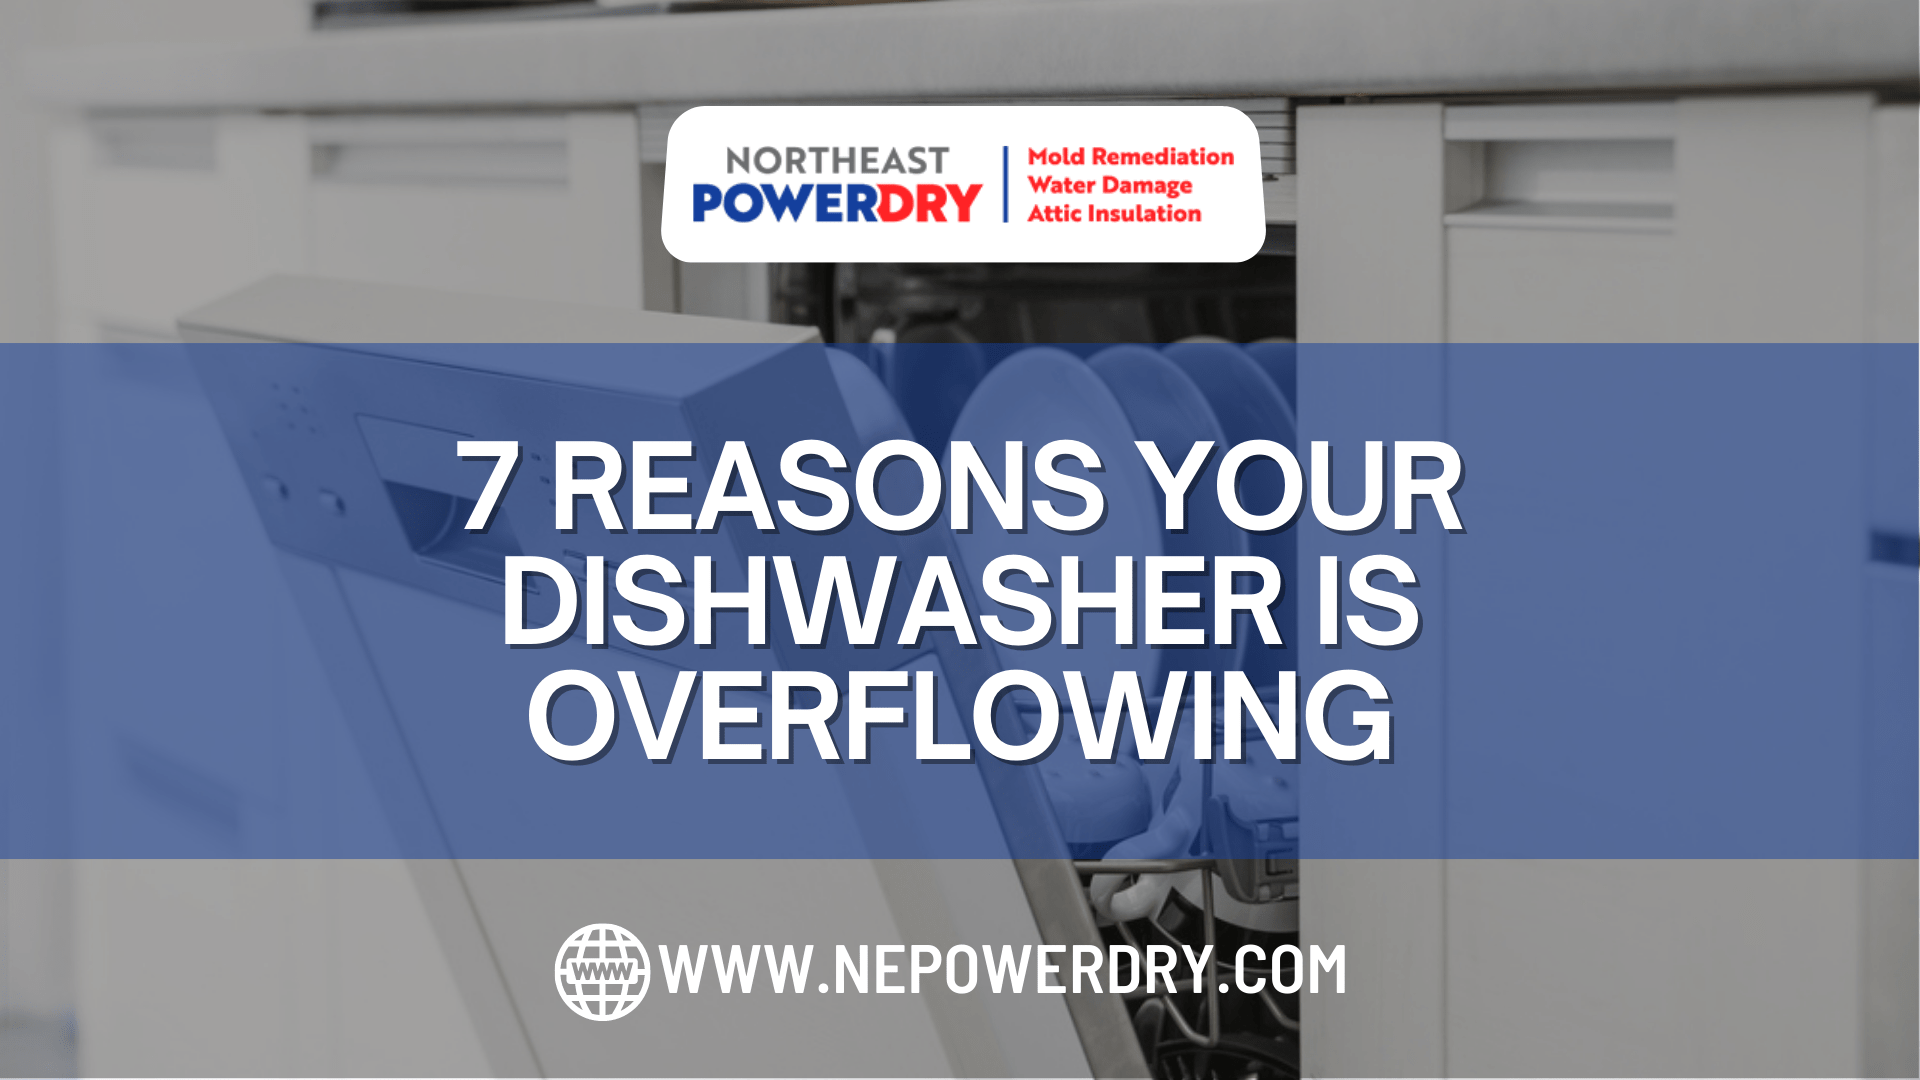 7 Reasons Your Dishwasher is Overflowing